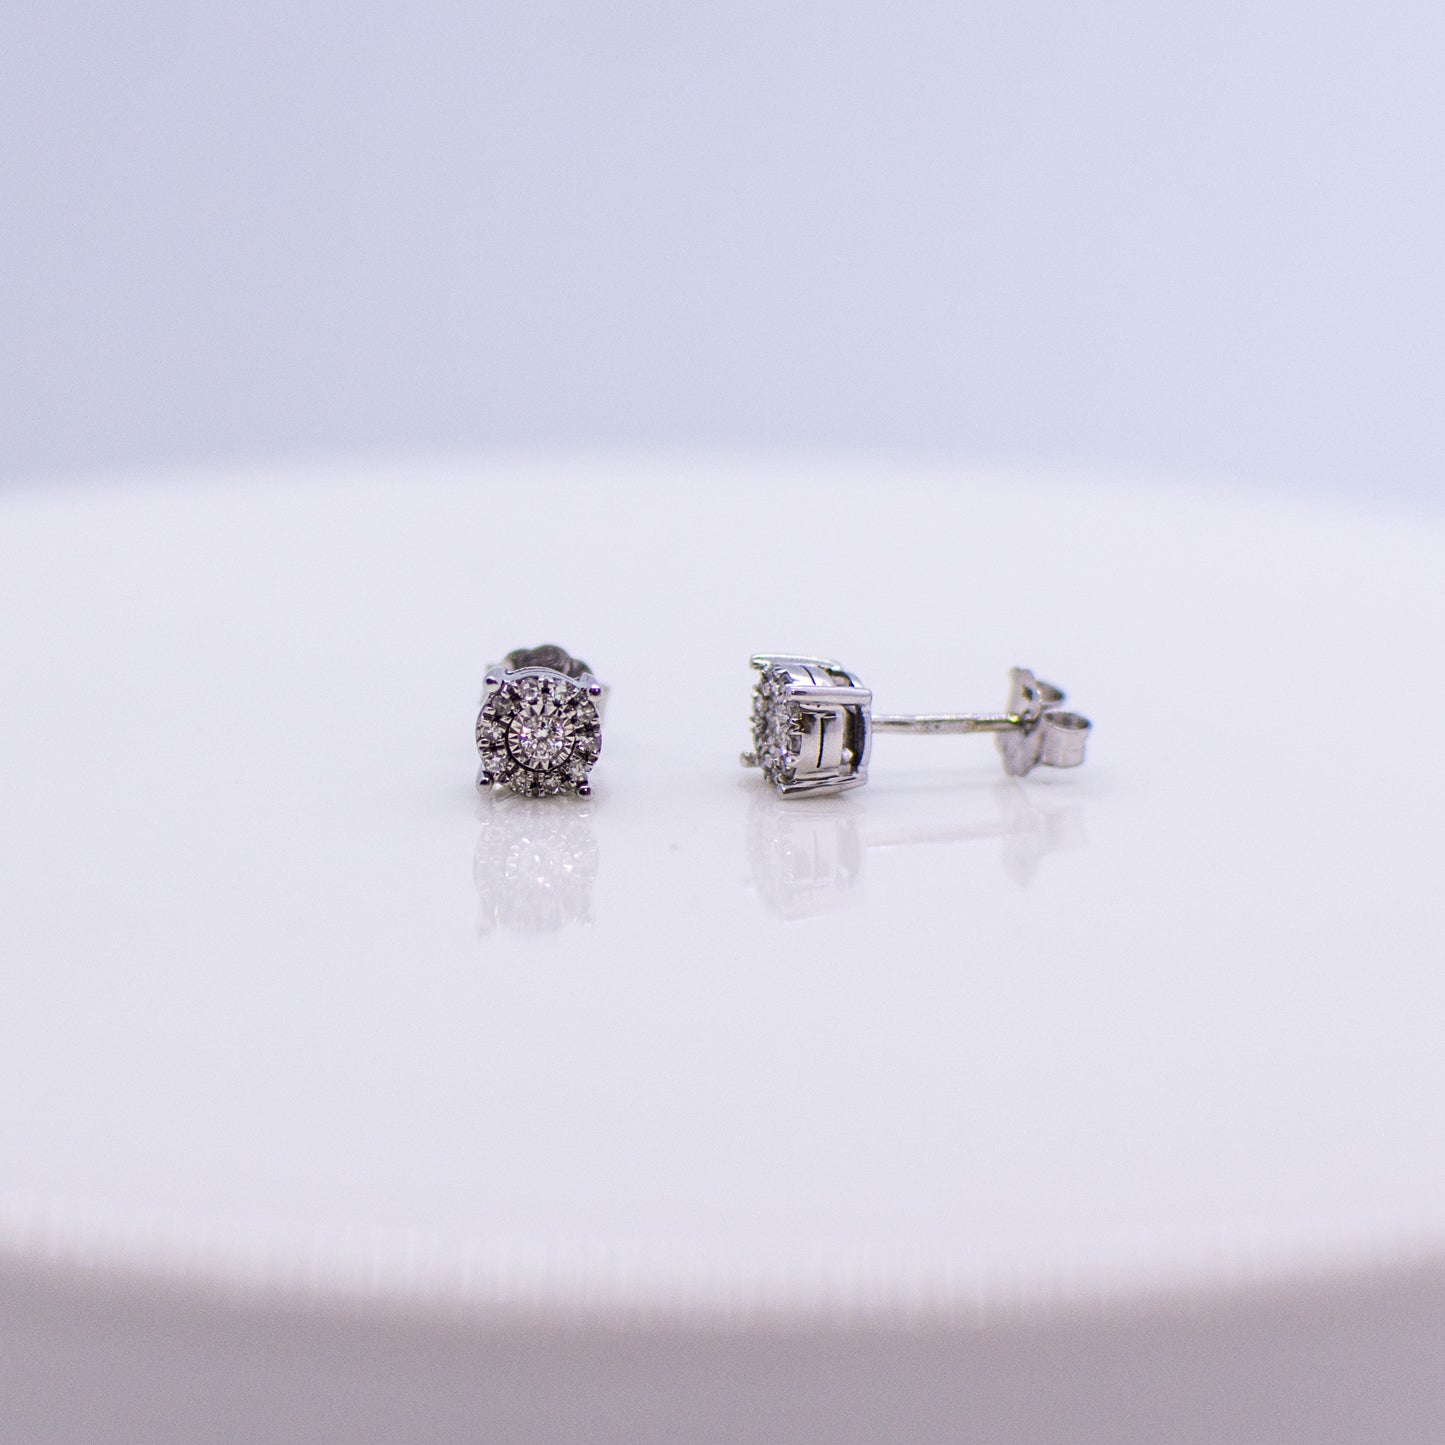 4mm wide stud earring set with diamonds. 0.10ct of round brilliant cut diamonds.  Illusion setting.  9ct white gold.   Butterfly backs.